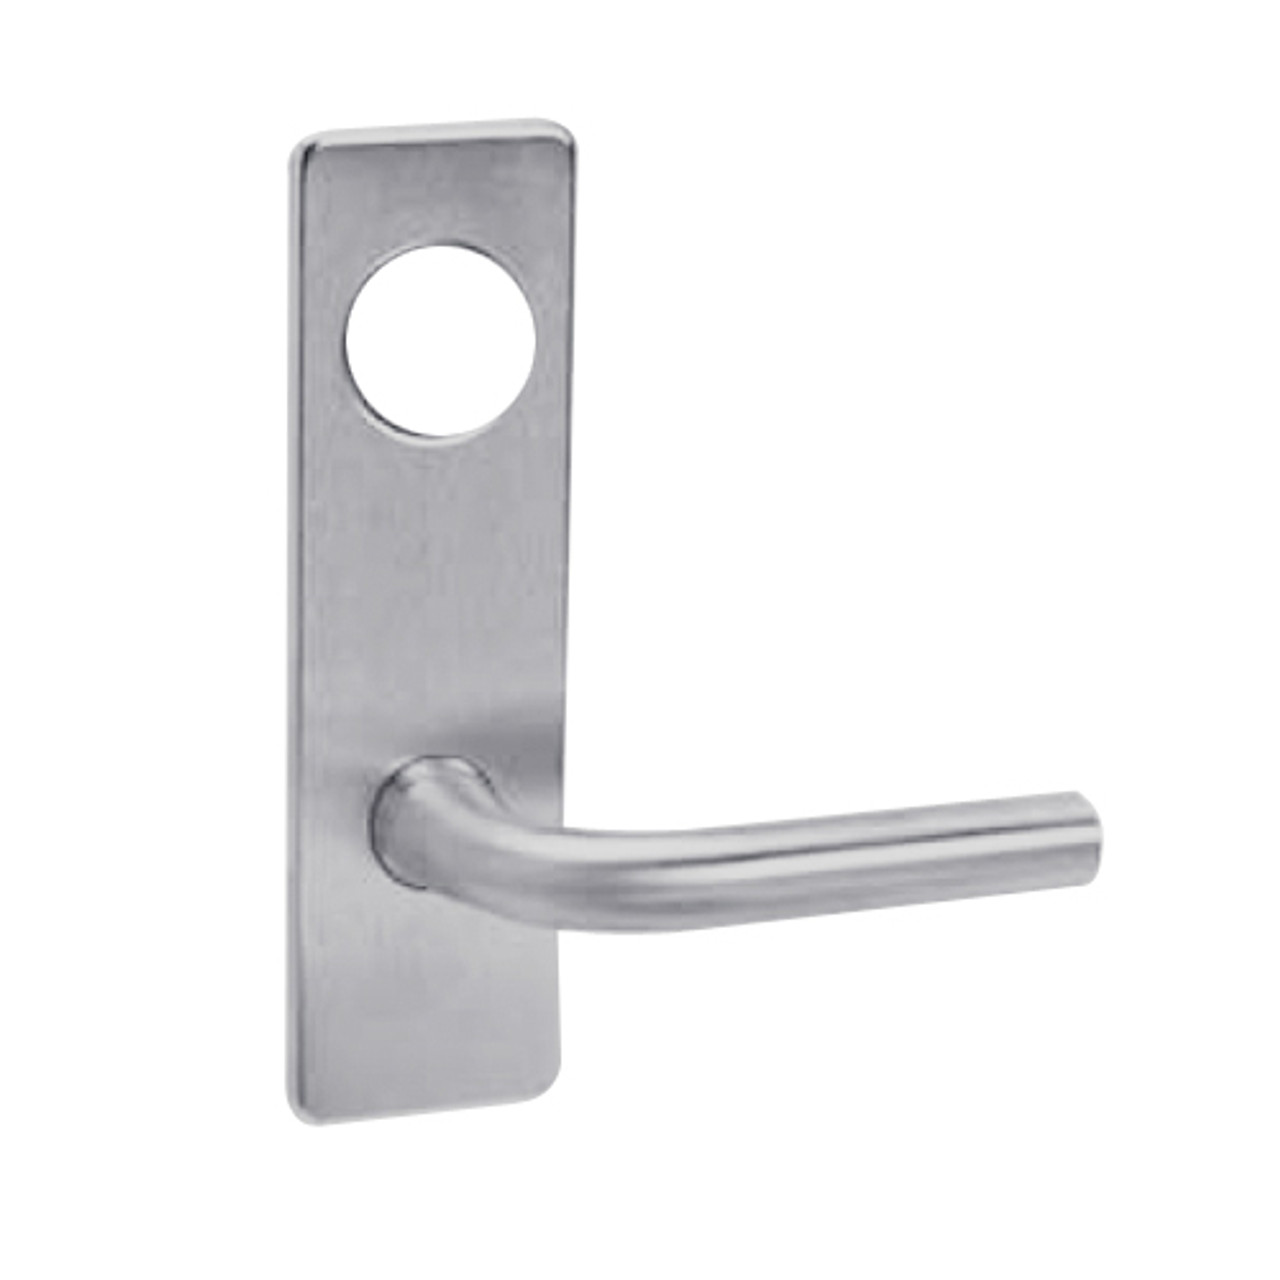 ML2042-RSN-626-CL6 Corbin Russwin ML2000 Series IC 6-Pin Less Core Mortise Entrance Locksets with Regis Lever in Satin Chrome